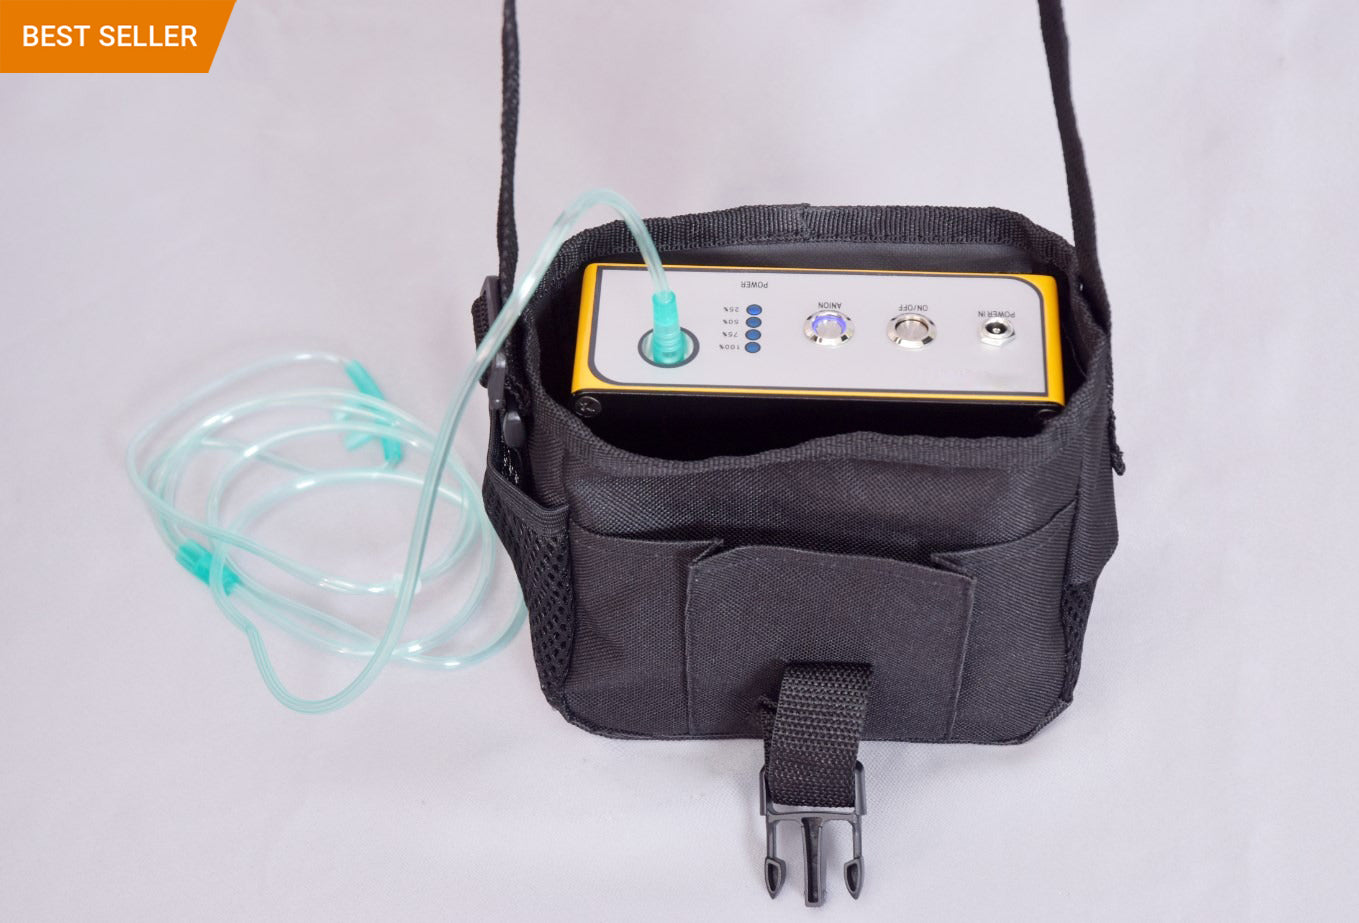 3L/min Light and Portable Smart Oxygen Concentrator Battery